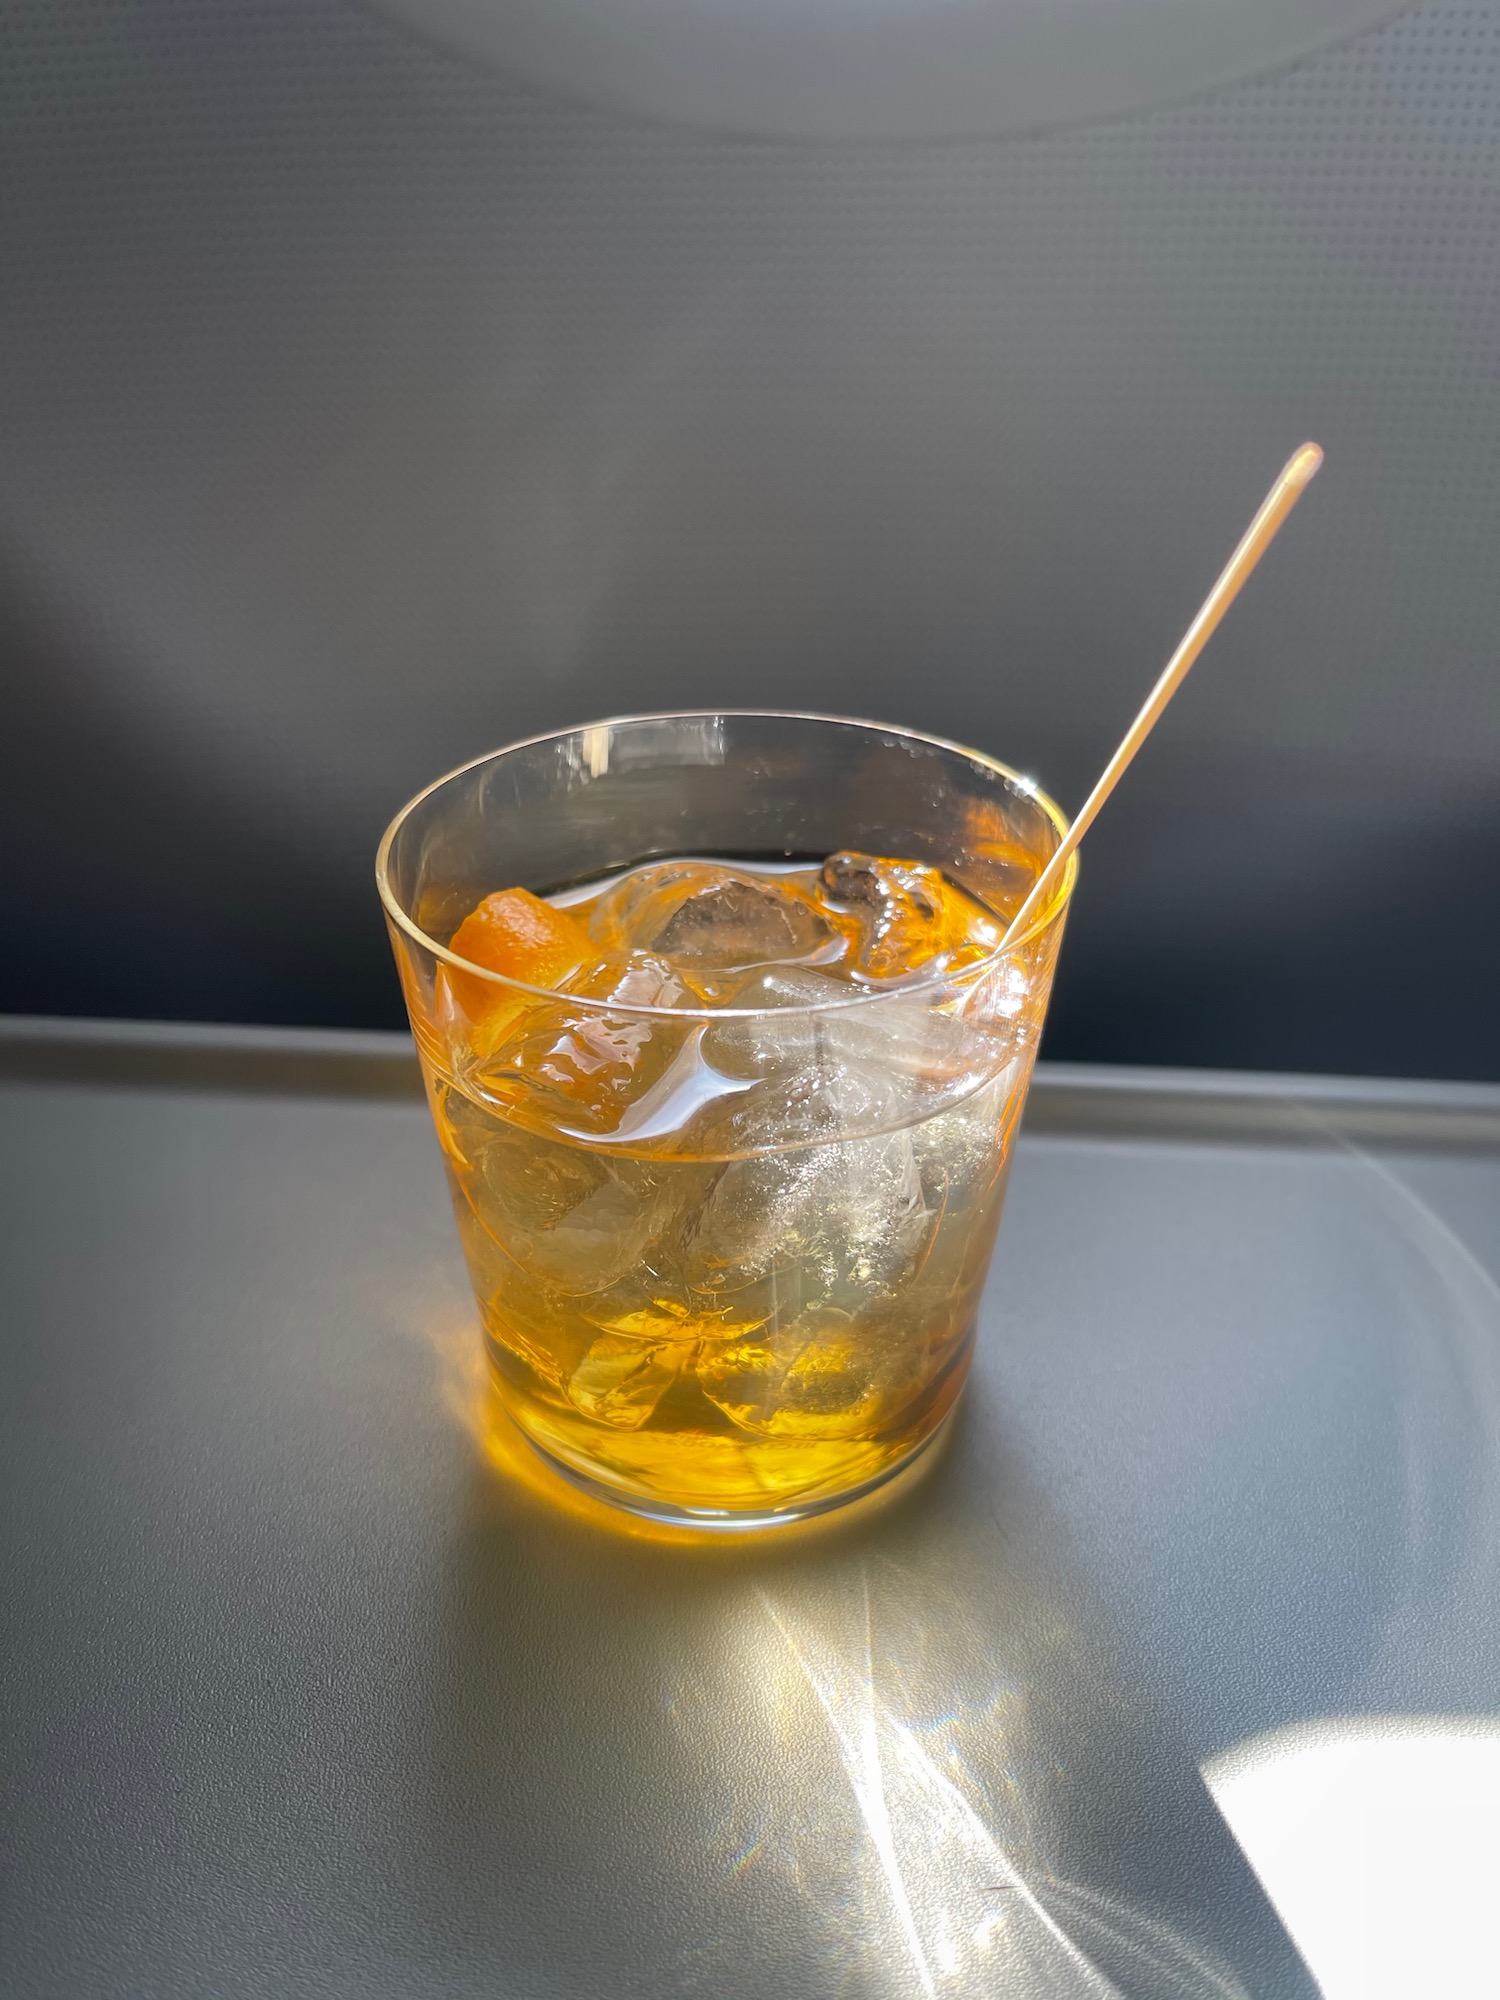 a glass of liquid with ice and a toothpick